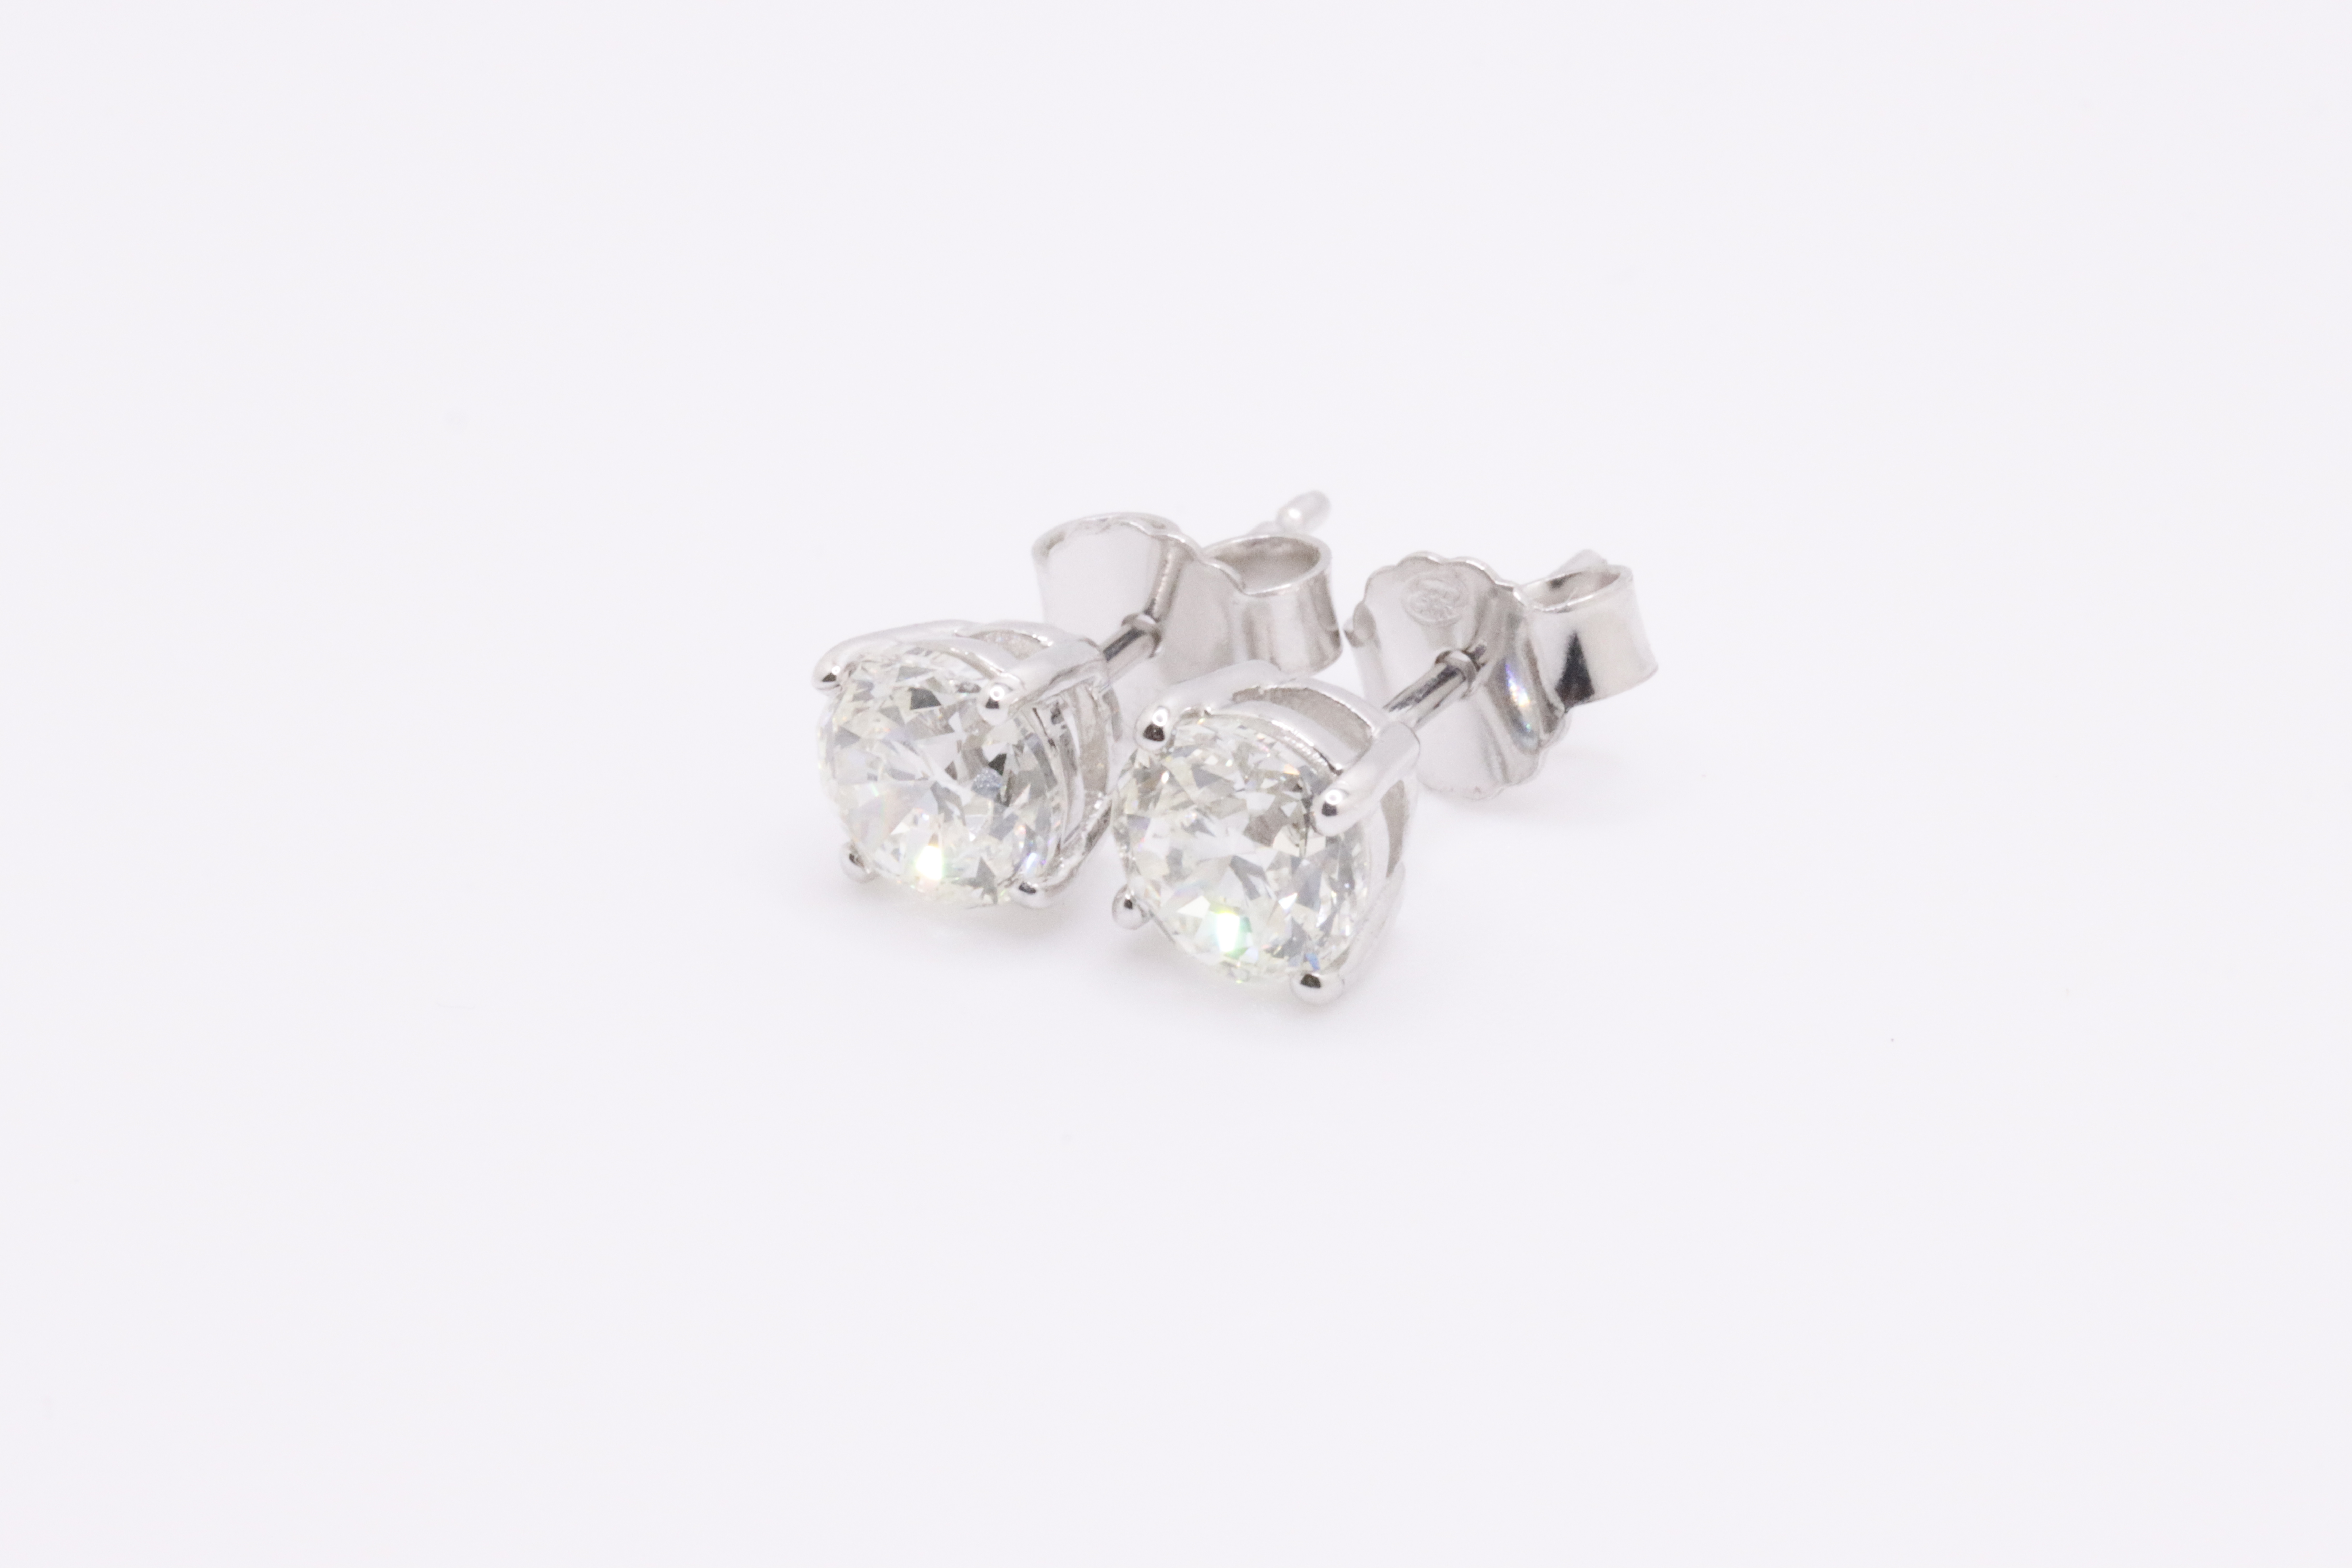 ** ON SALE ** Round Brilliant Cut 1.00 Carat Diamond 18kt White Gold Earrings- F Colour VS Clarity - Image 3 of 5